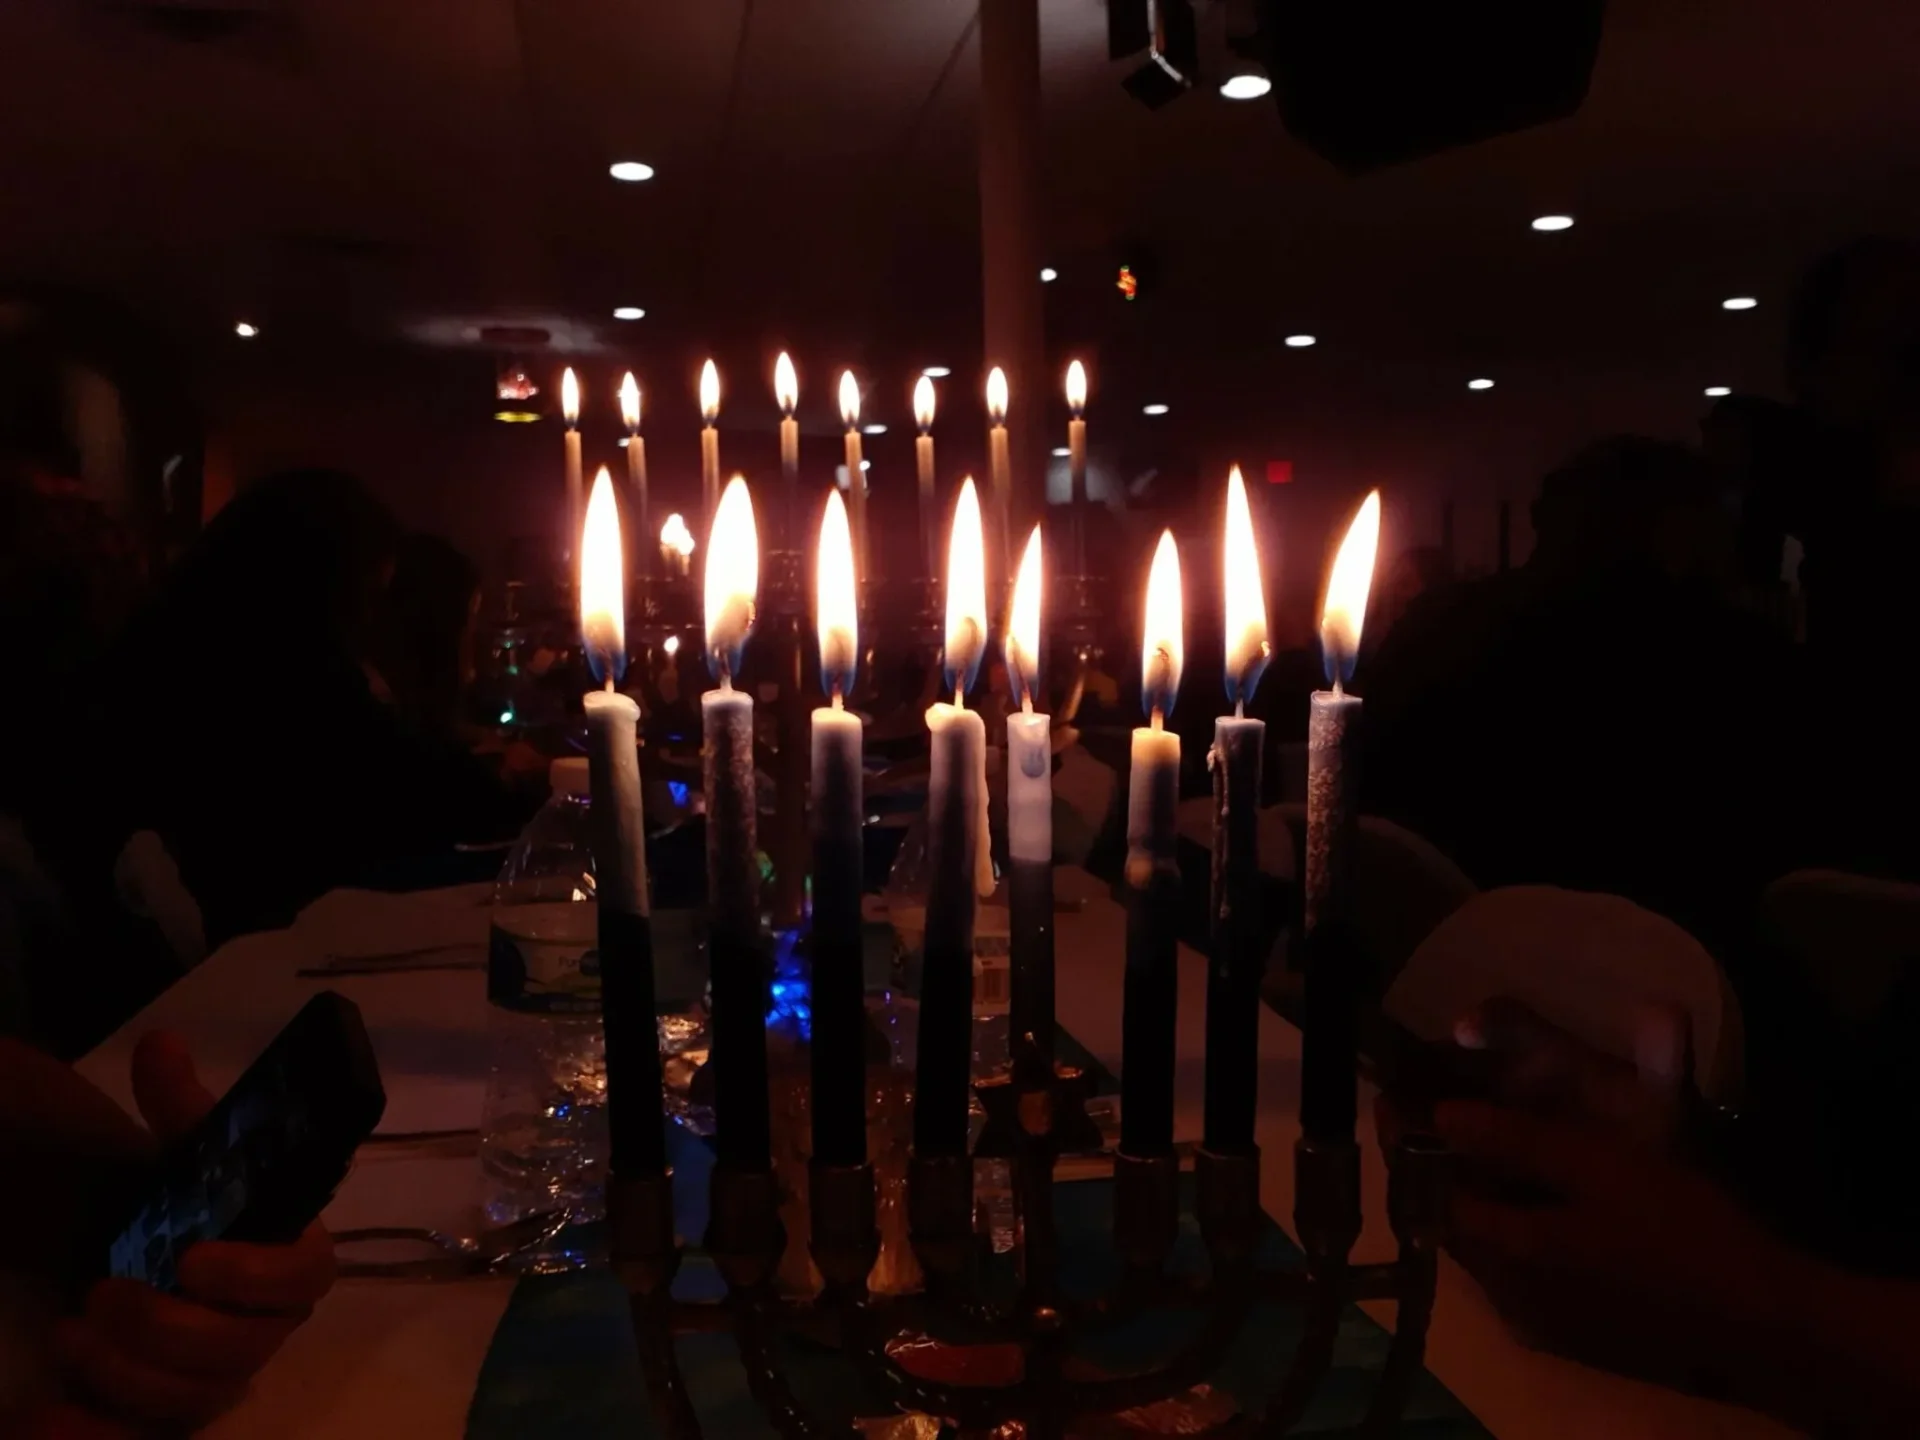 A group of candles lit up in the dark.